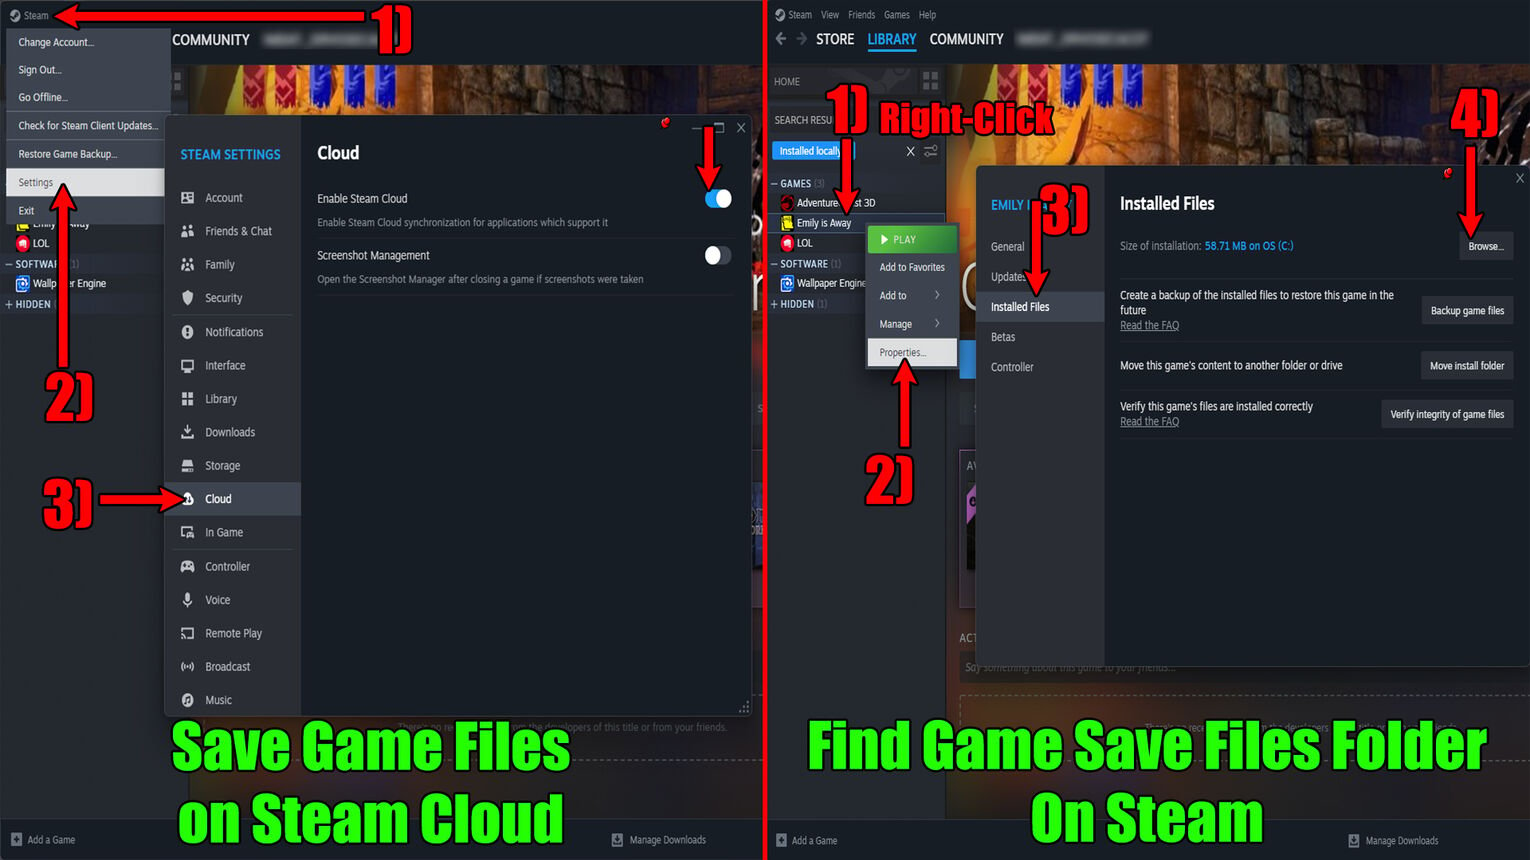 Steam Enable Cloud and Browse Local Game Files